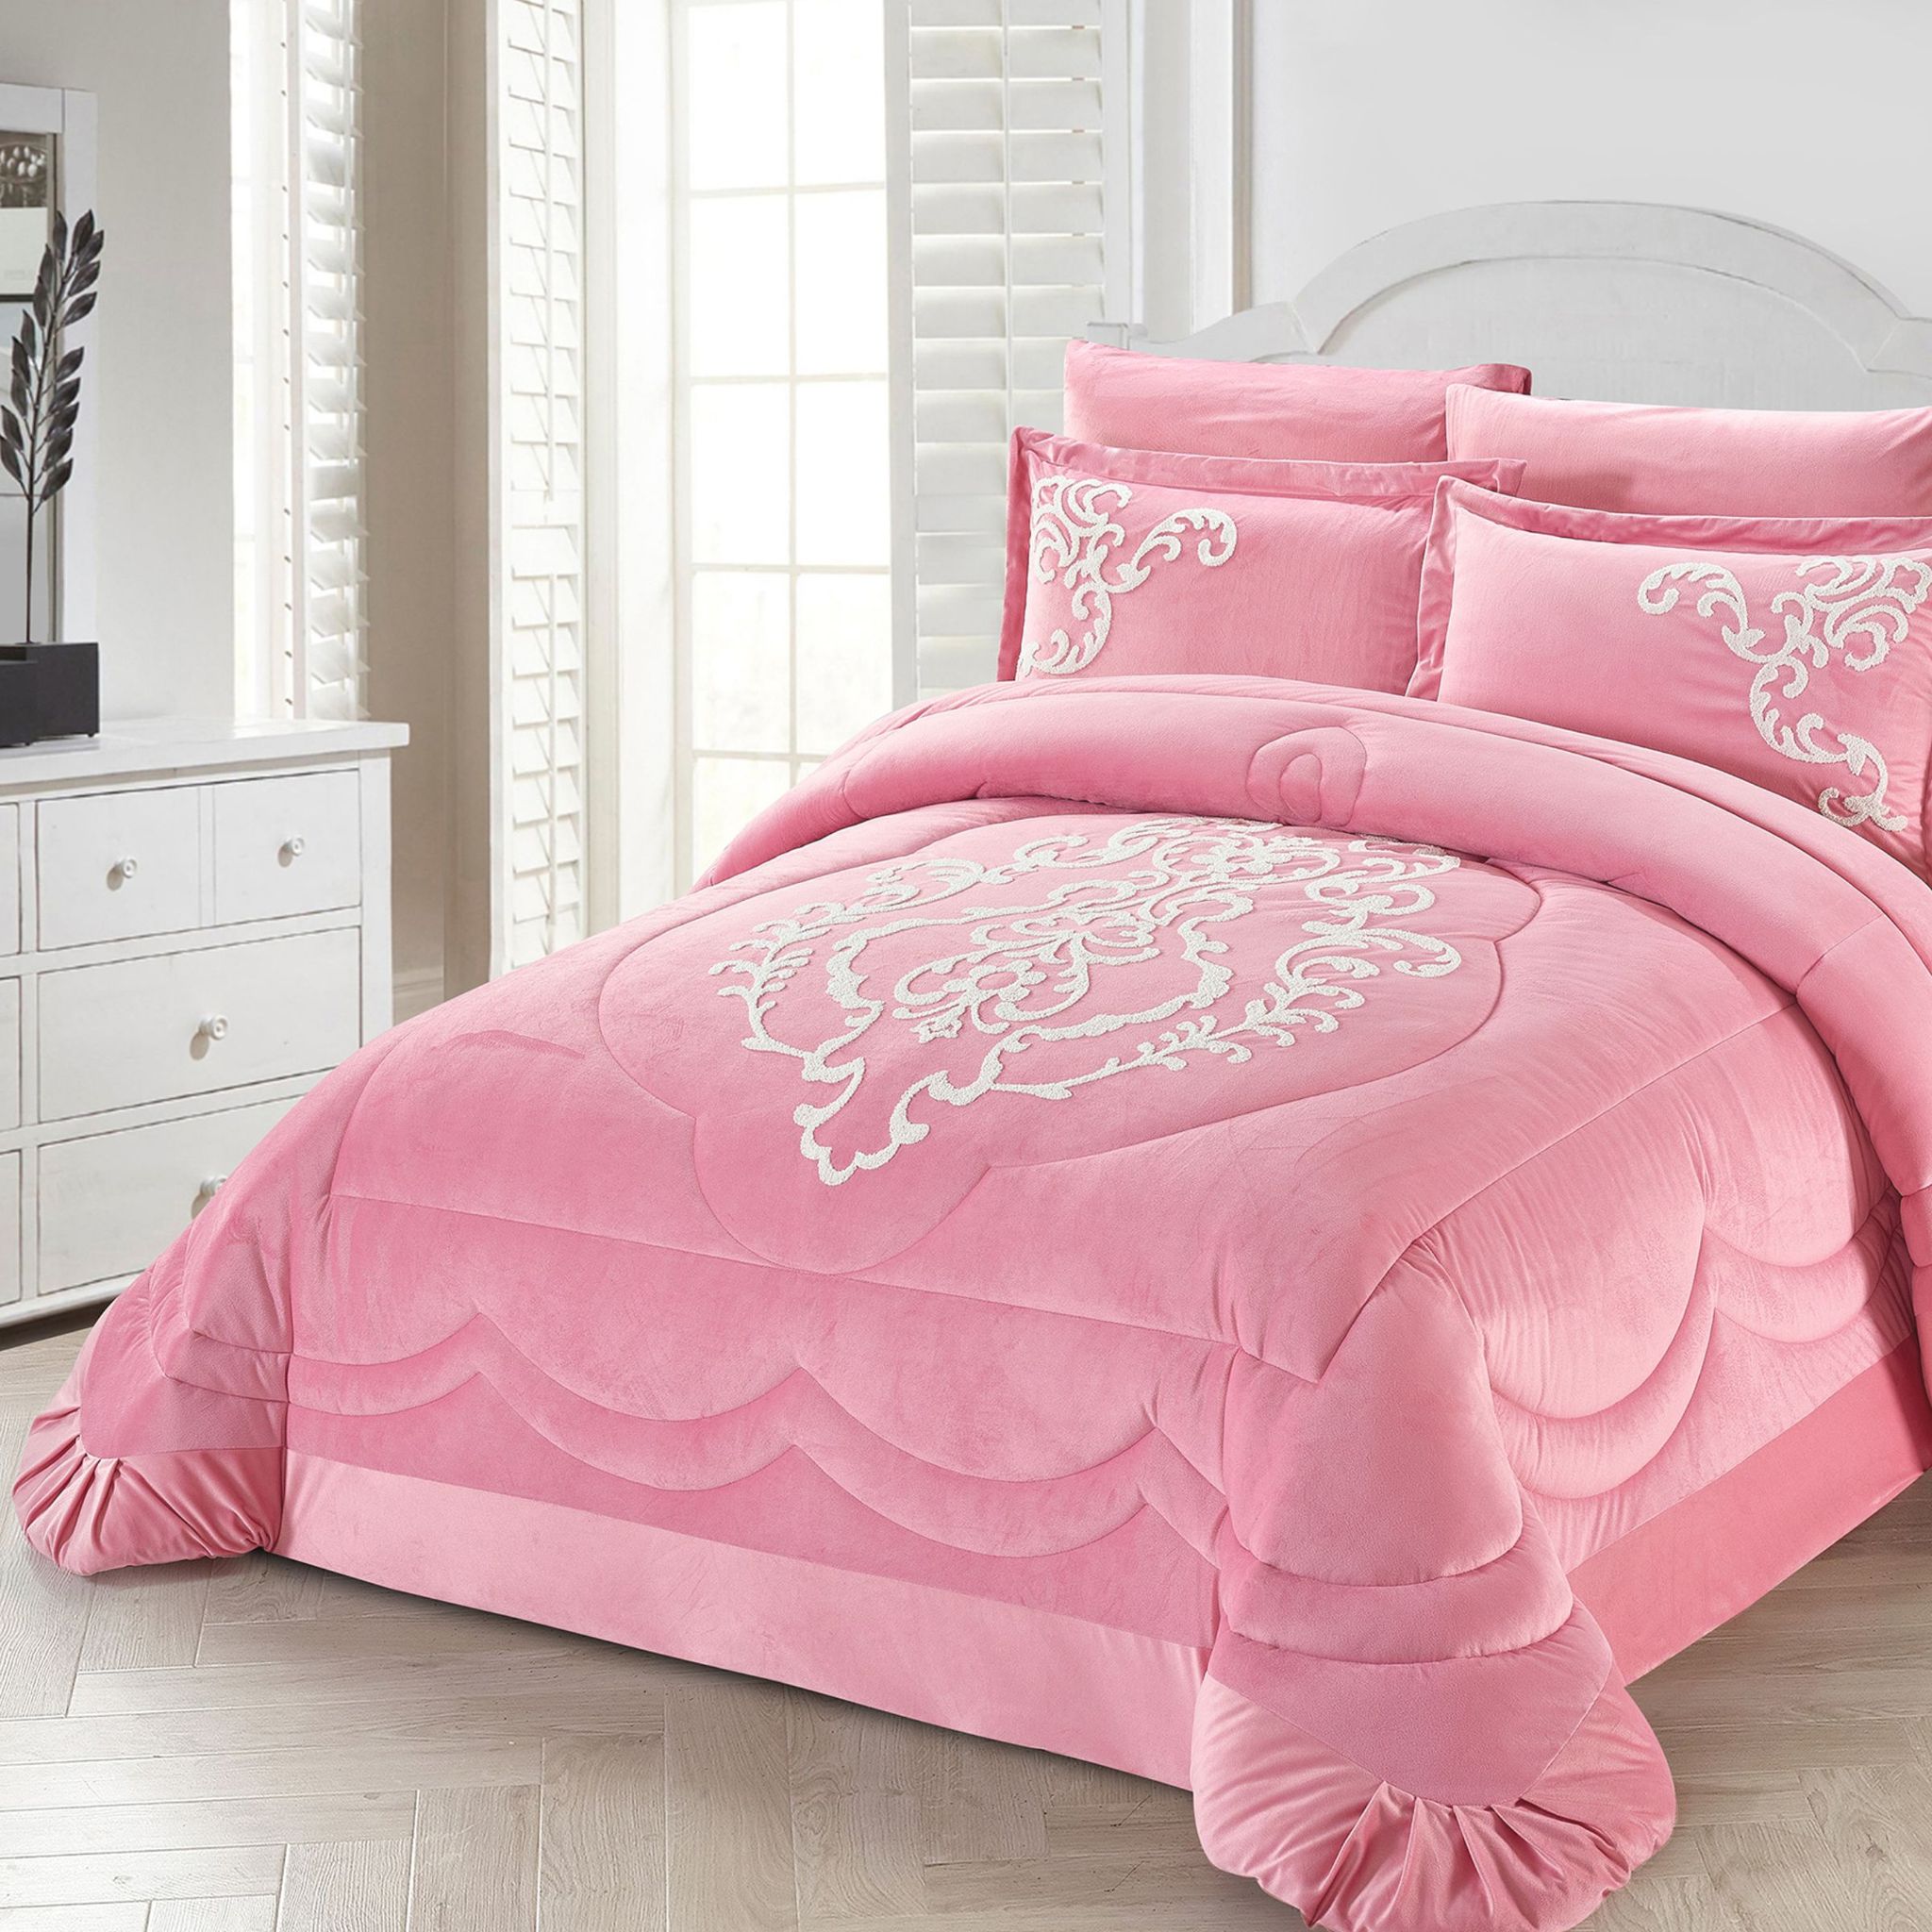 3D Damask Embroidered Comforter Set 6-Piece King Daisy Pink